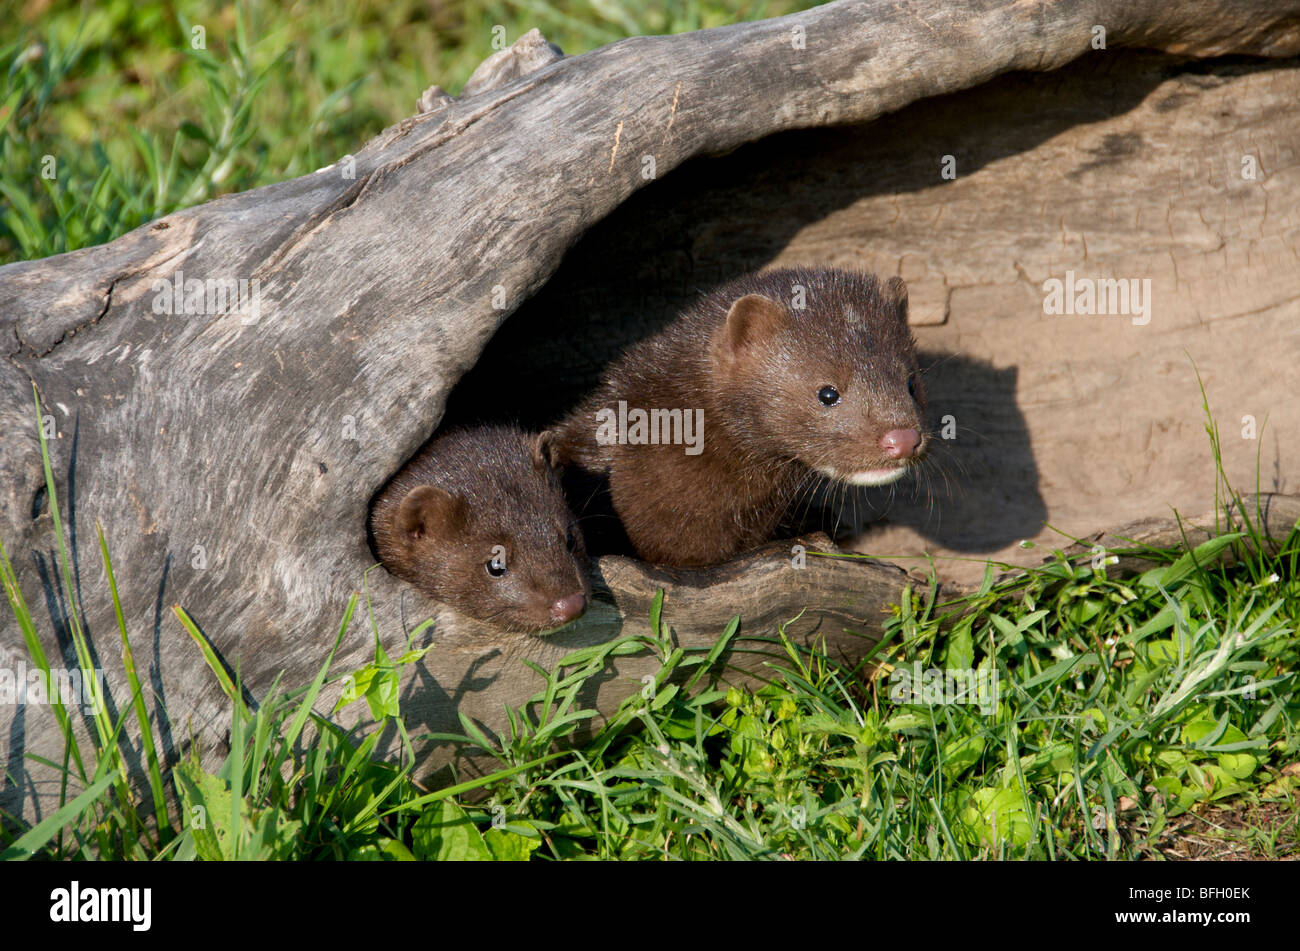 Mink (Mustela vison) young hiding in hollow log. North America. Stock Photo